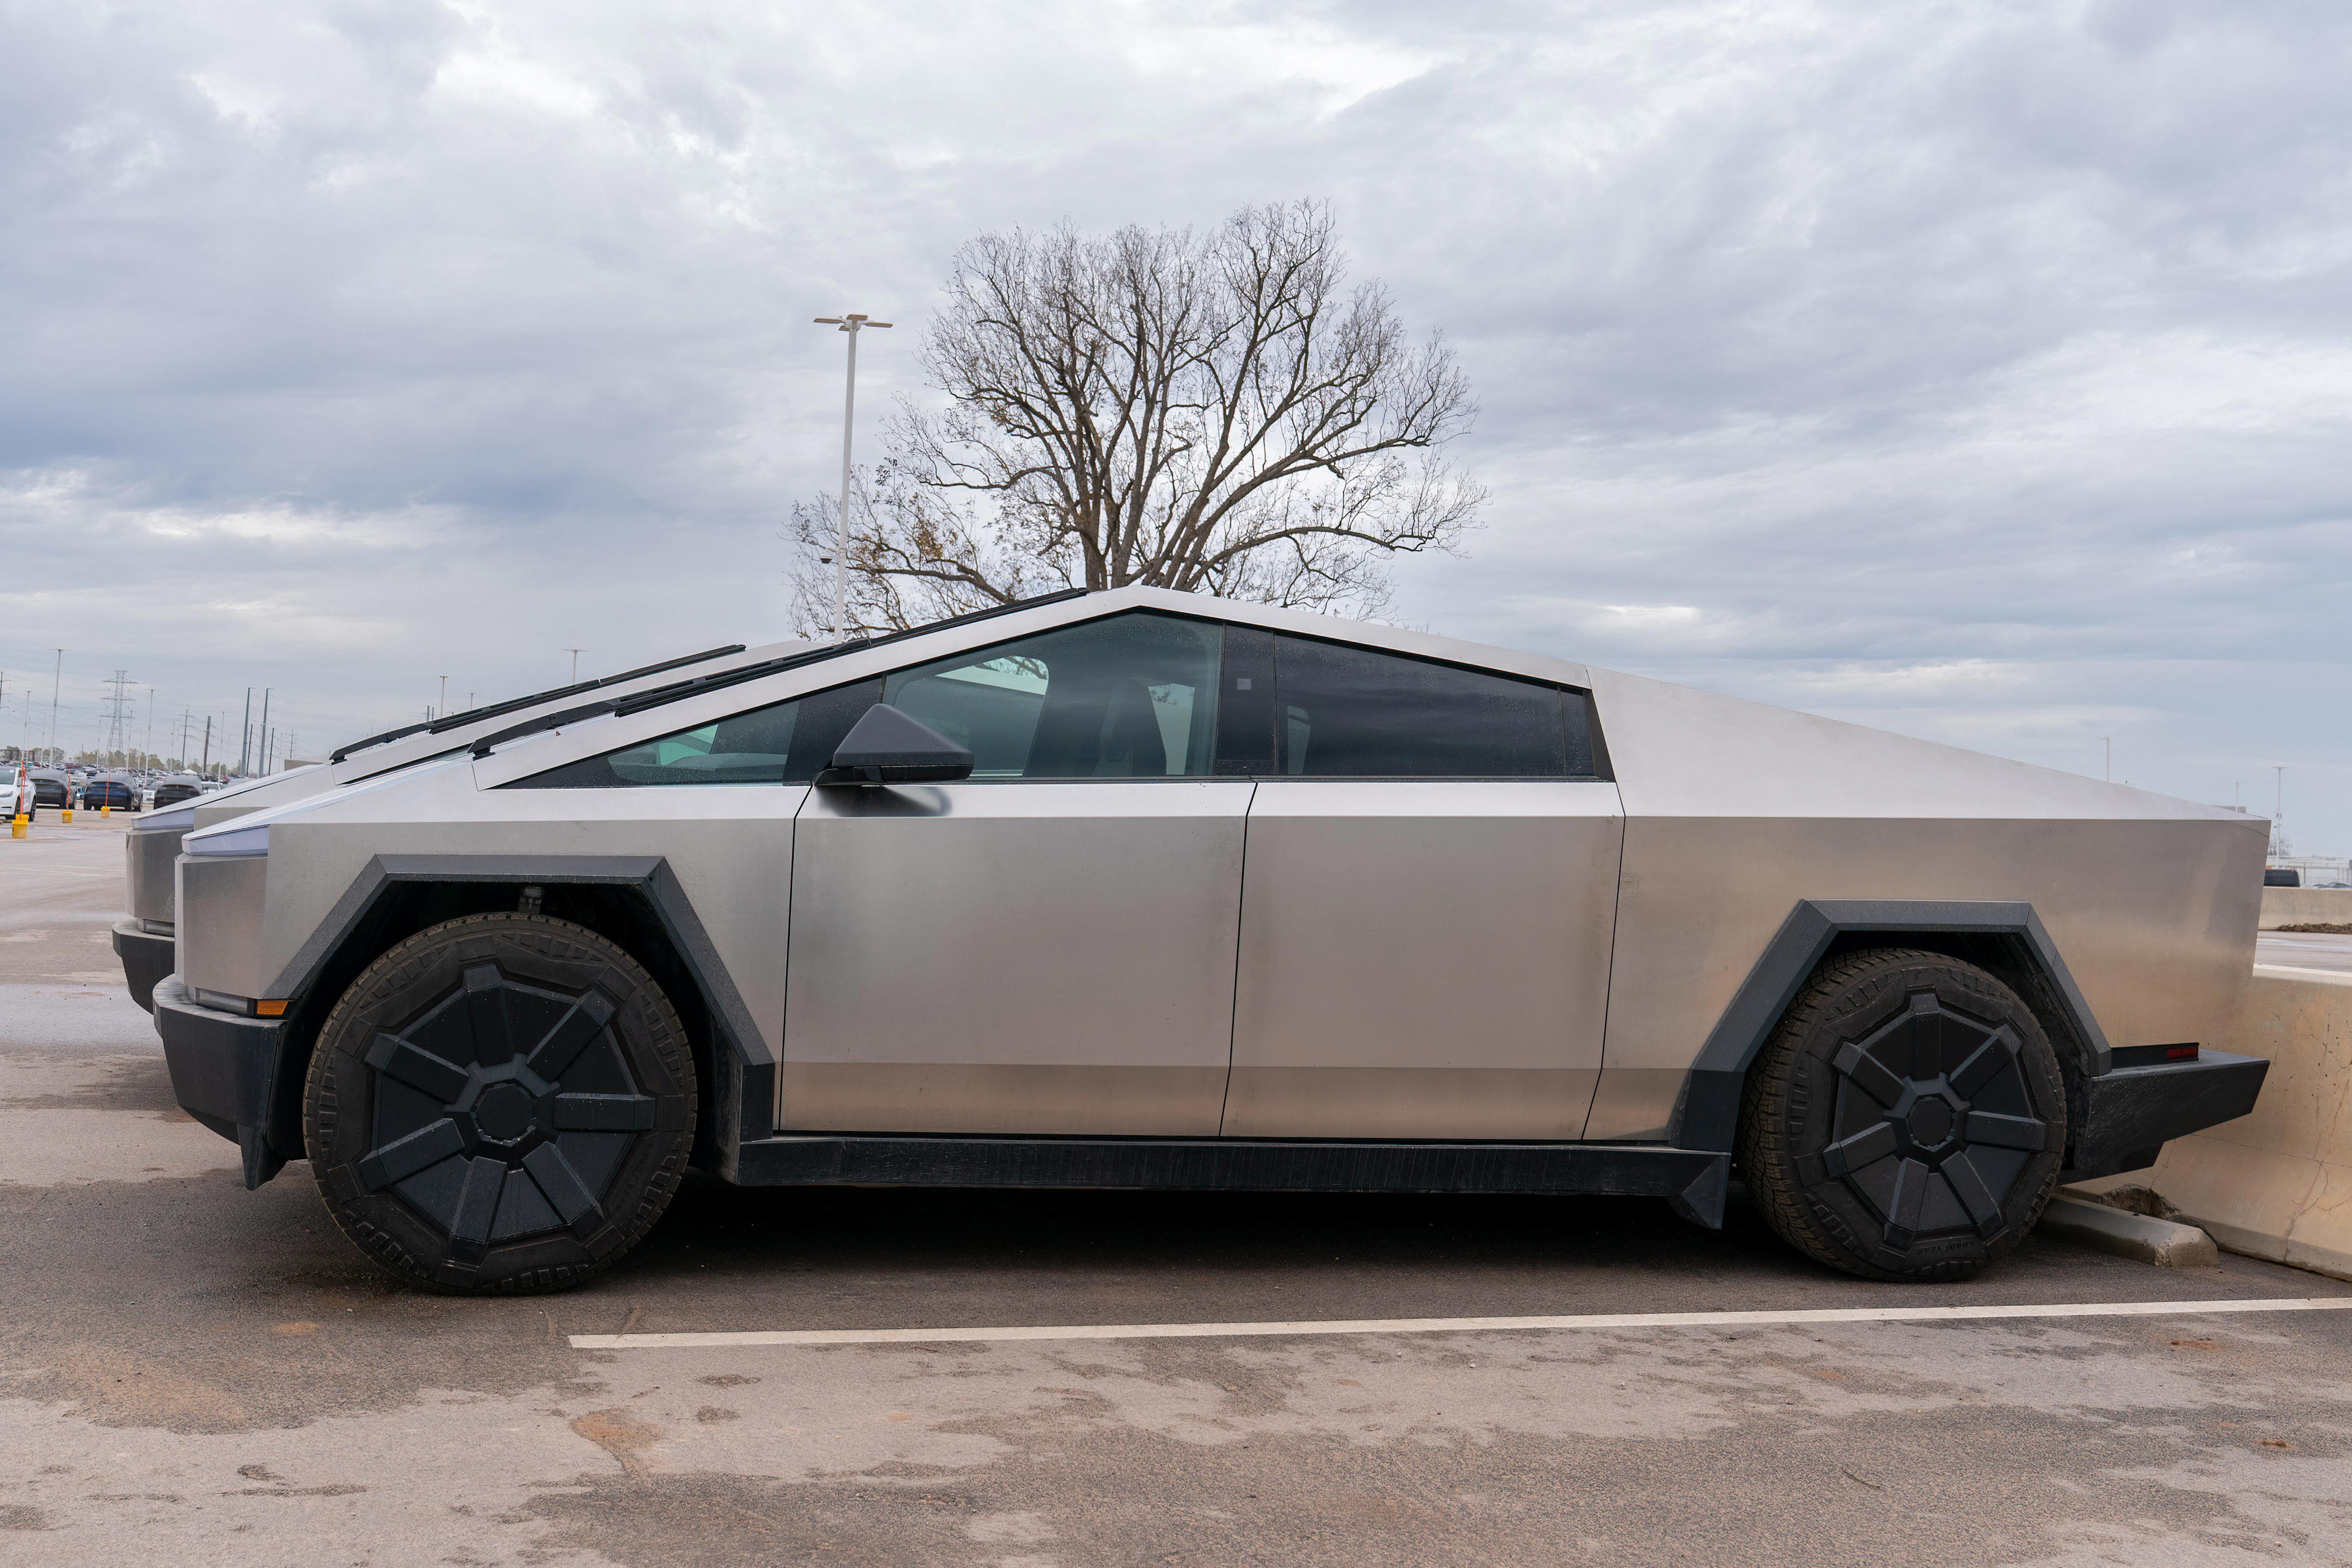 microsoft, camping in the tesla cybertruck sure seems overly complicated compared to a plain old rooftop tent on a rivian r1t